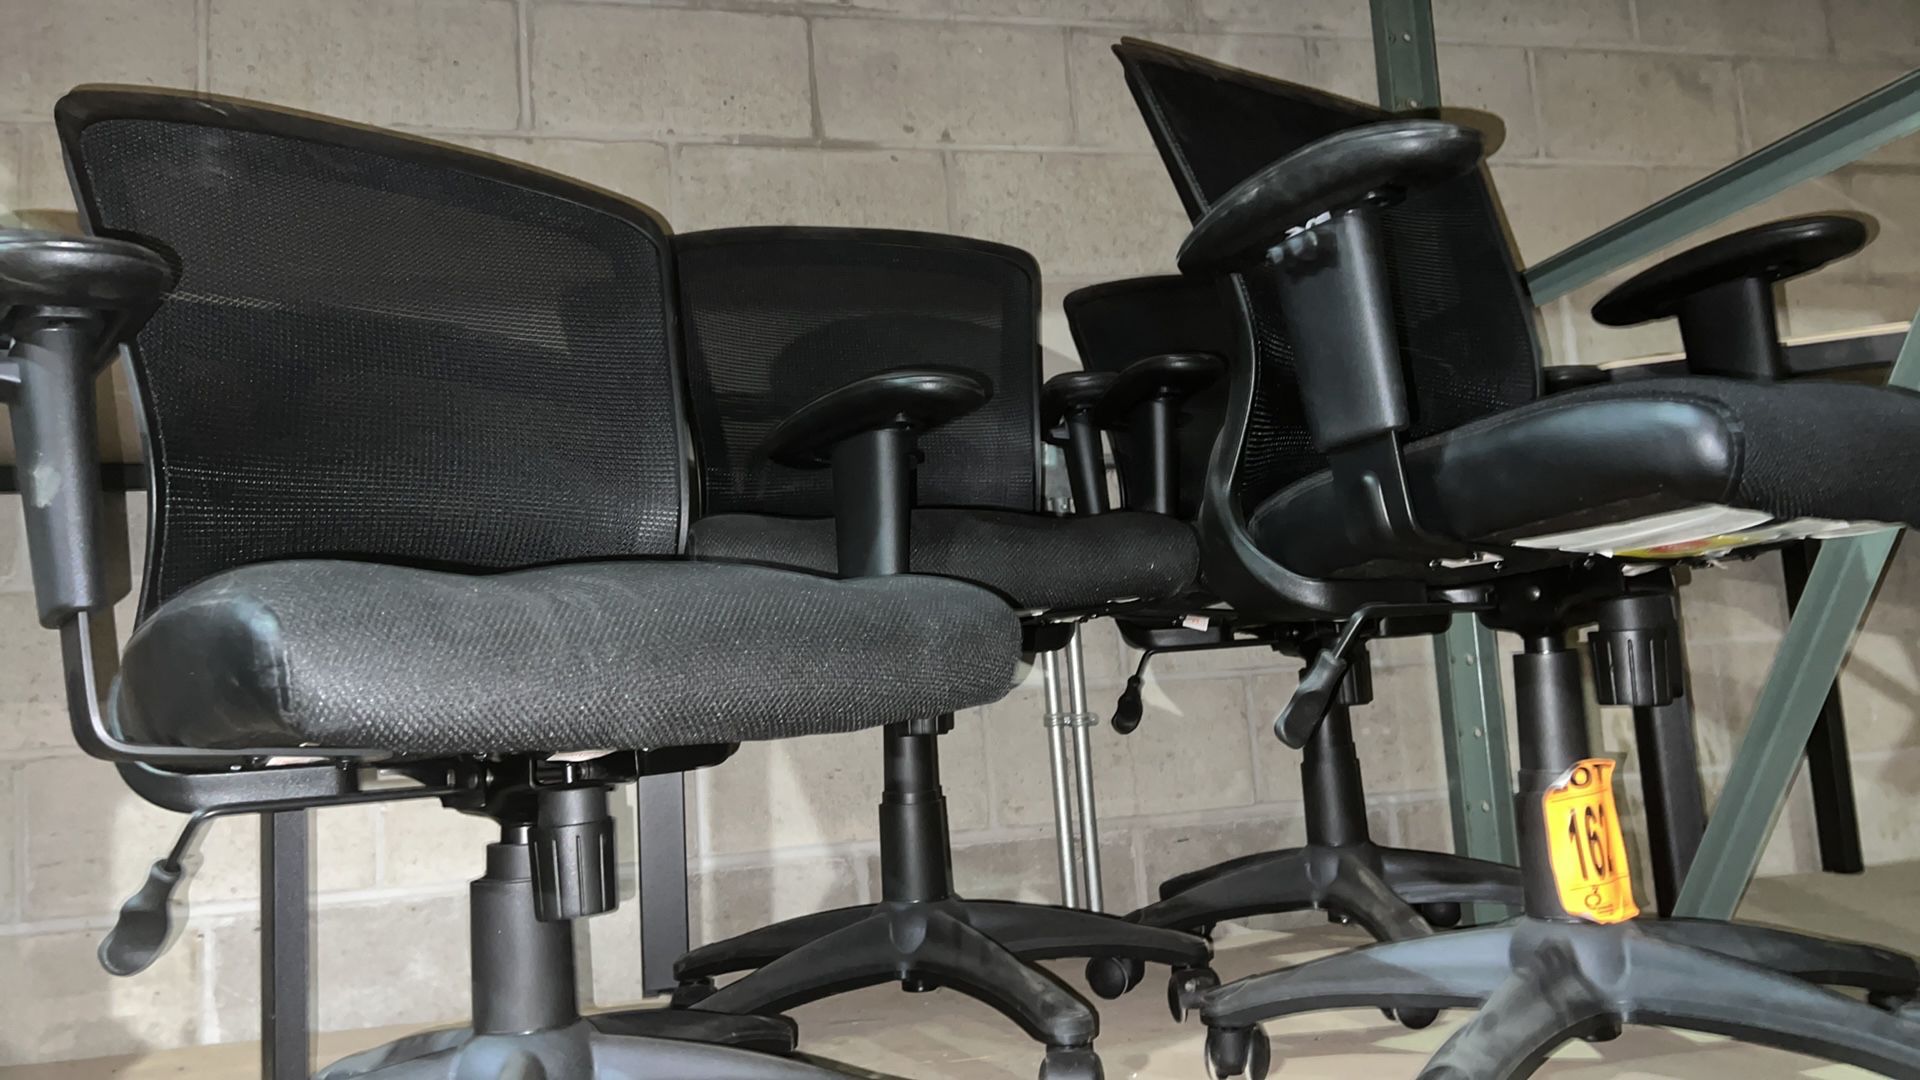 Lot of (3) multi-adjustable padded office chairs and stool - Image 3 of 5